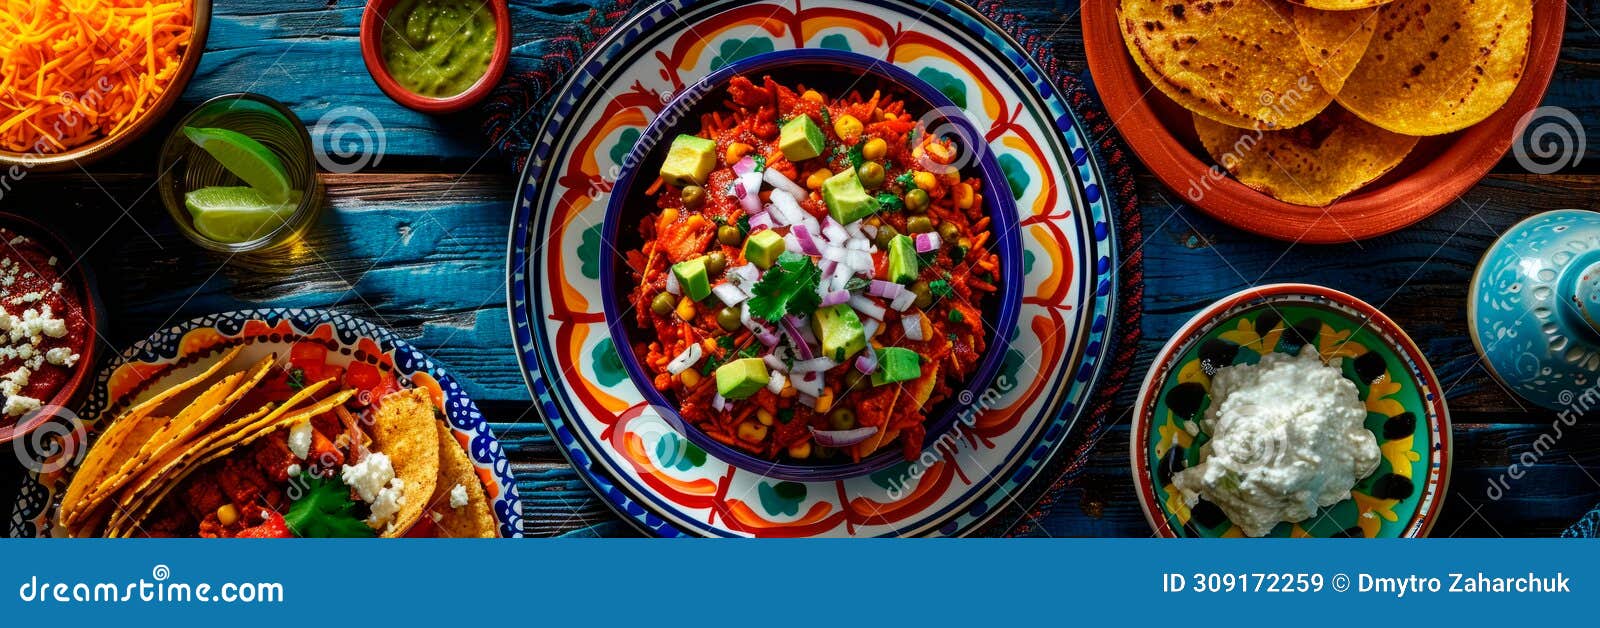 a traditional mexican breakfast with dishes such as chilaquiles.